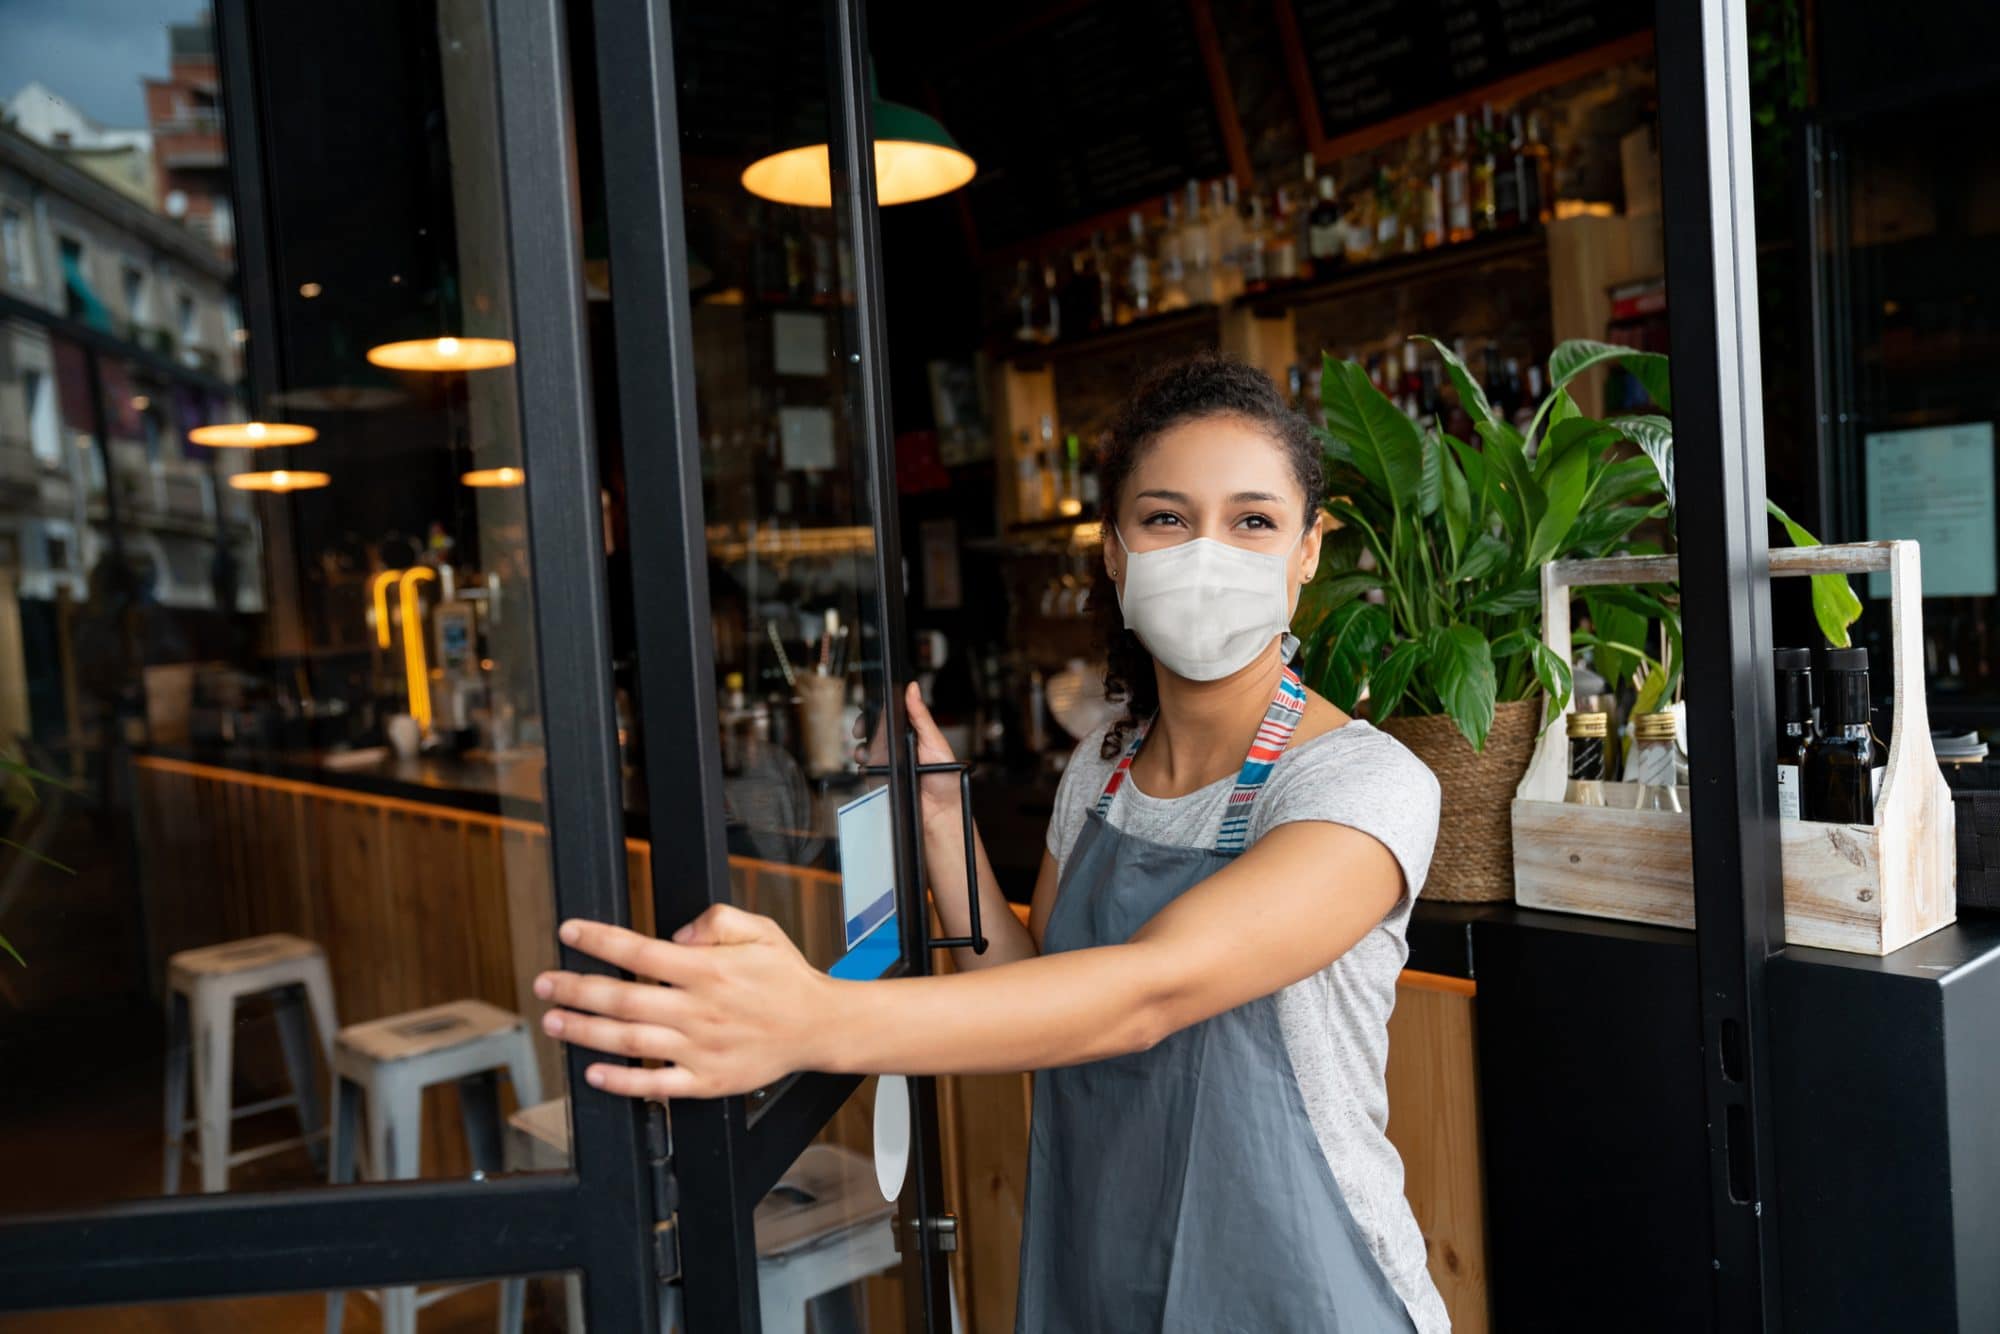 Safety for retail customers and employees in pandemic